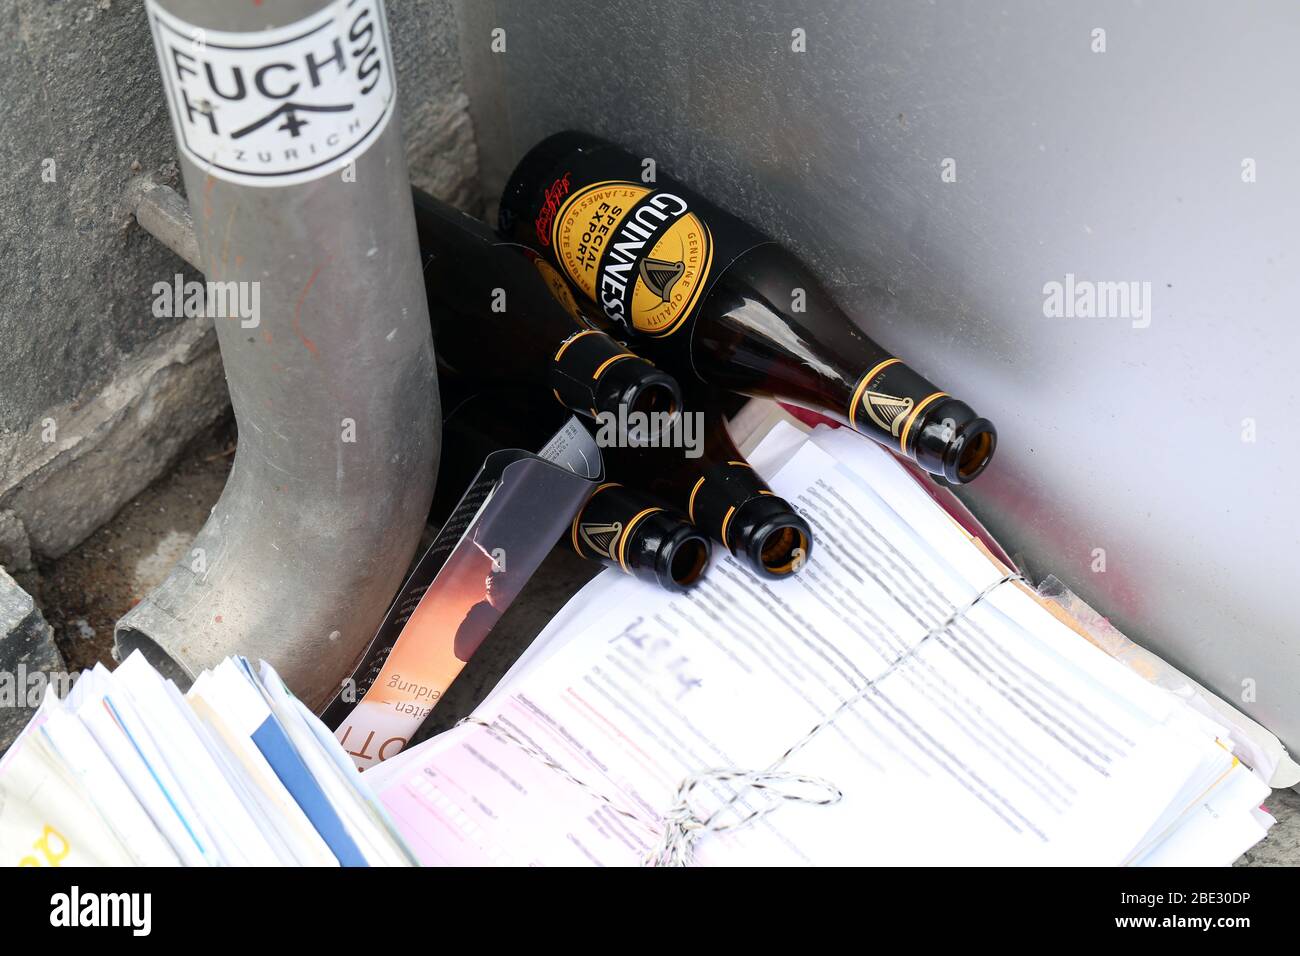 Guinness beer bottles and old papers left to a street corner near a water pipe located Zürich Switzerland, March 2020. Trash on the road to be picked. Stock Photo